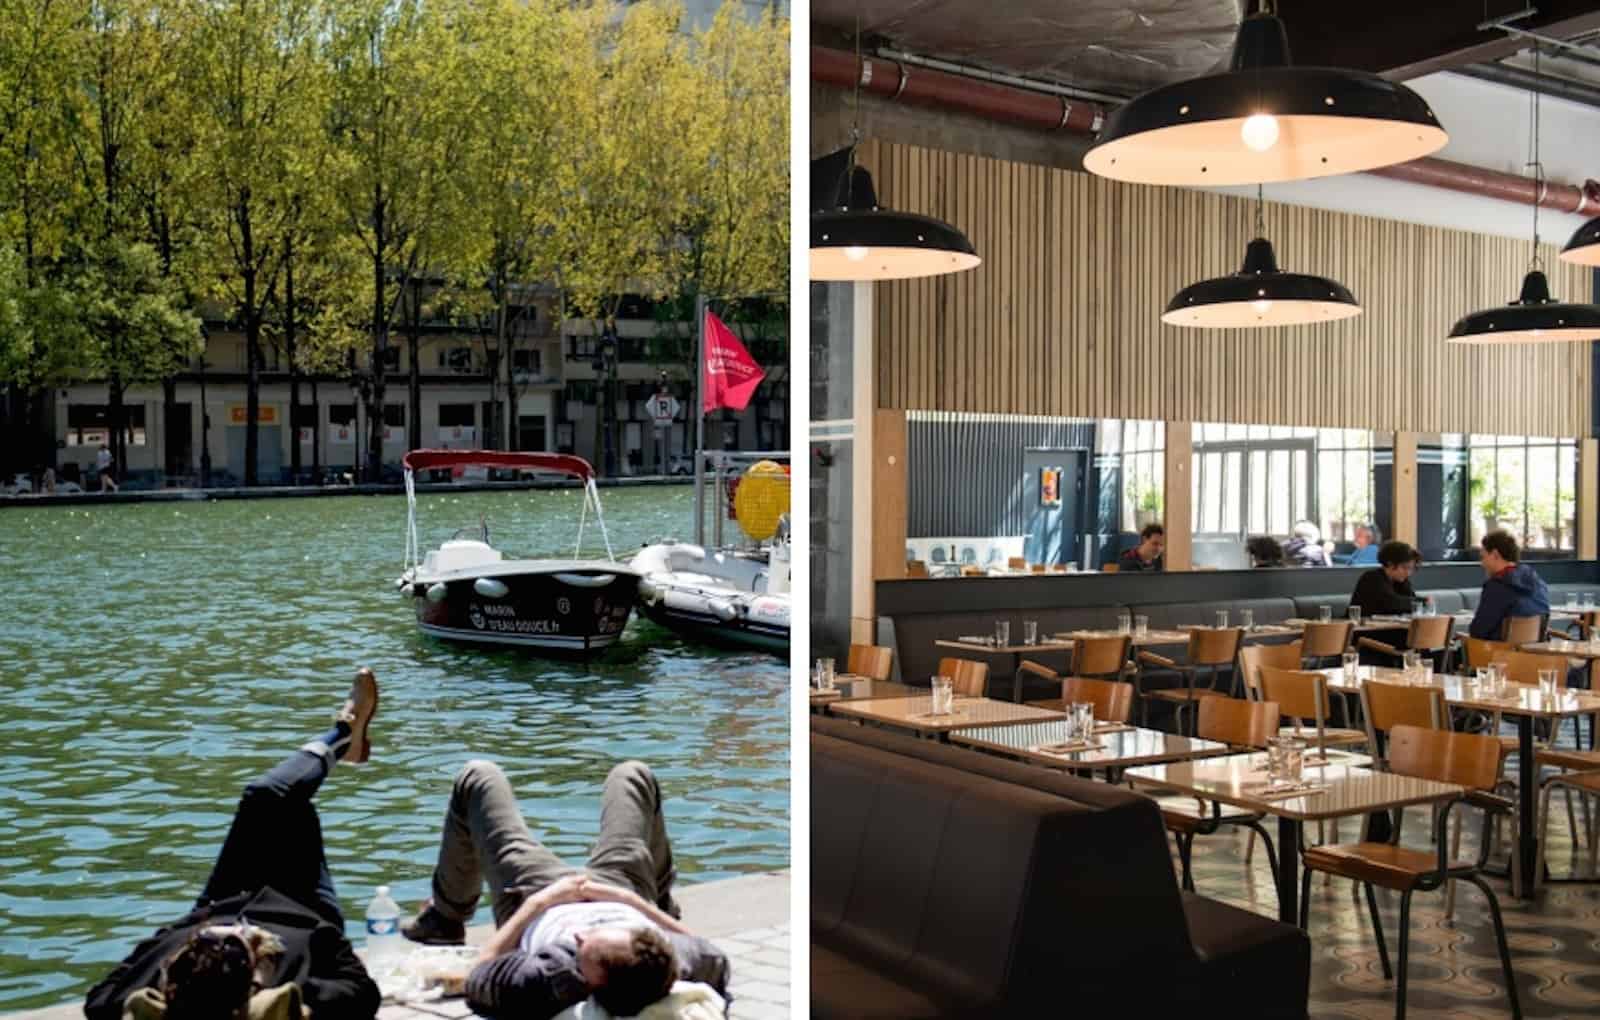 A weekend along Paris' Canal Saint-Martin, an upcoming neighborhood with markets, boutiques, cafes, and more